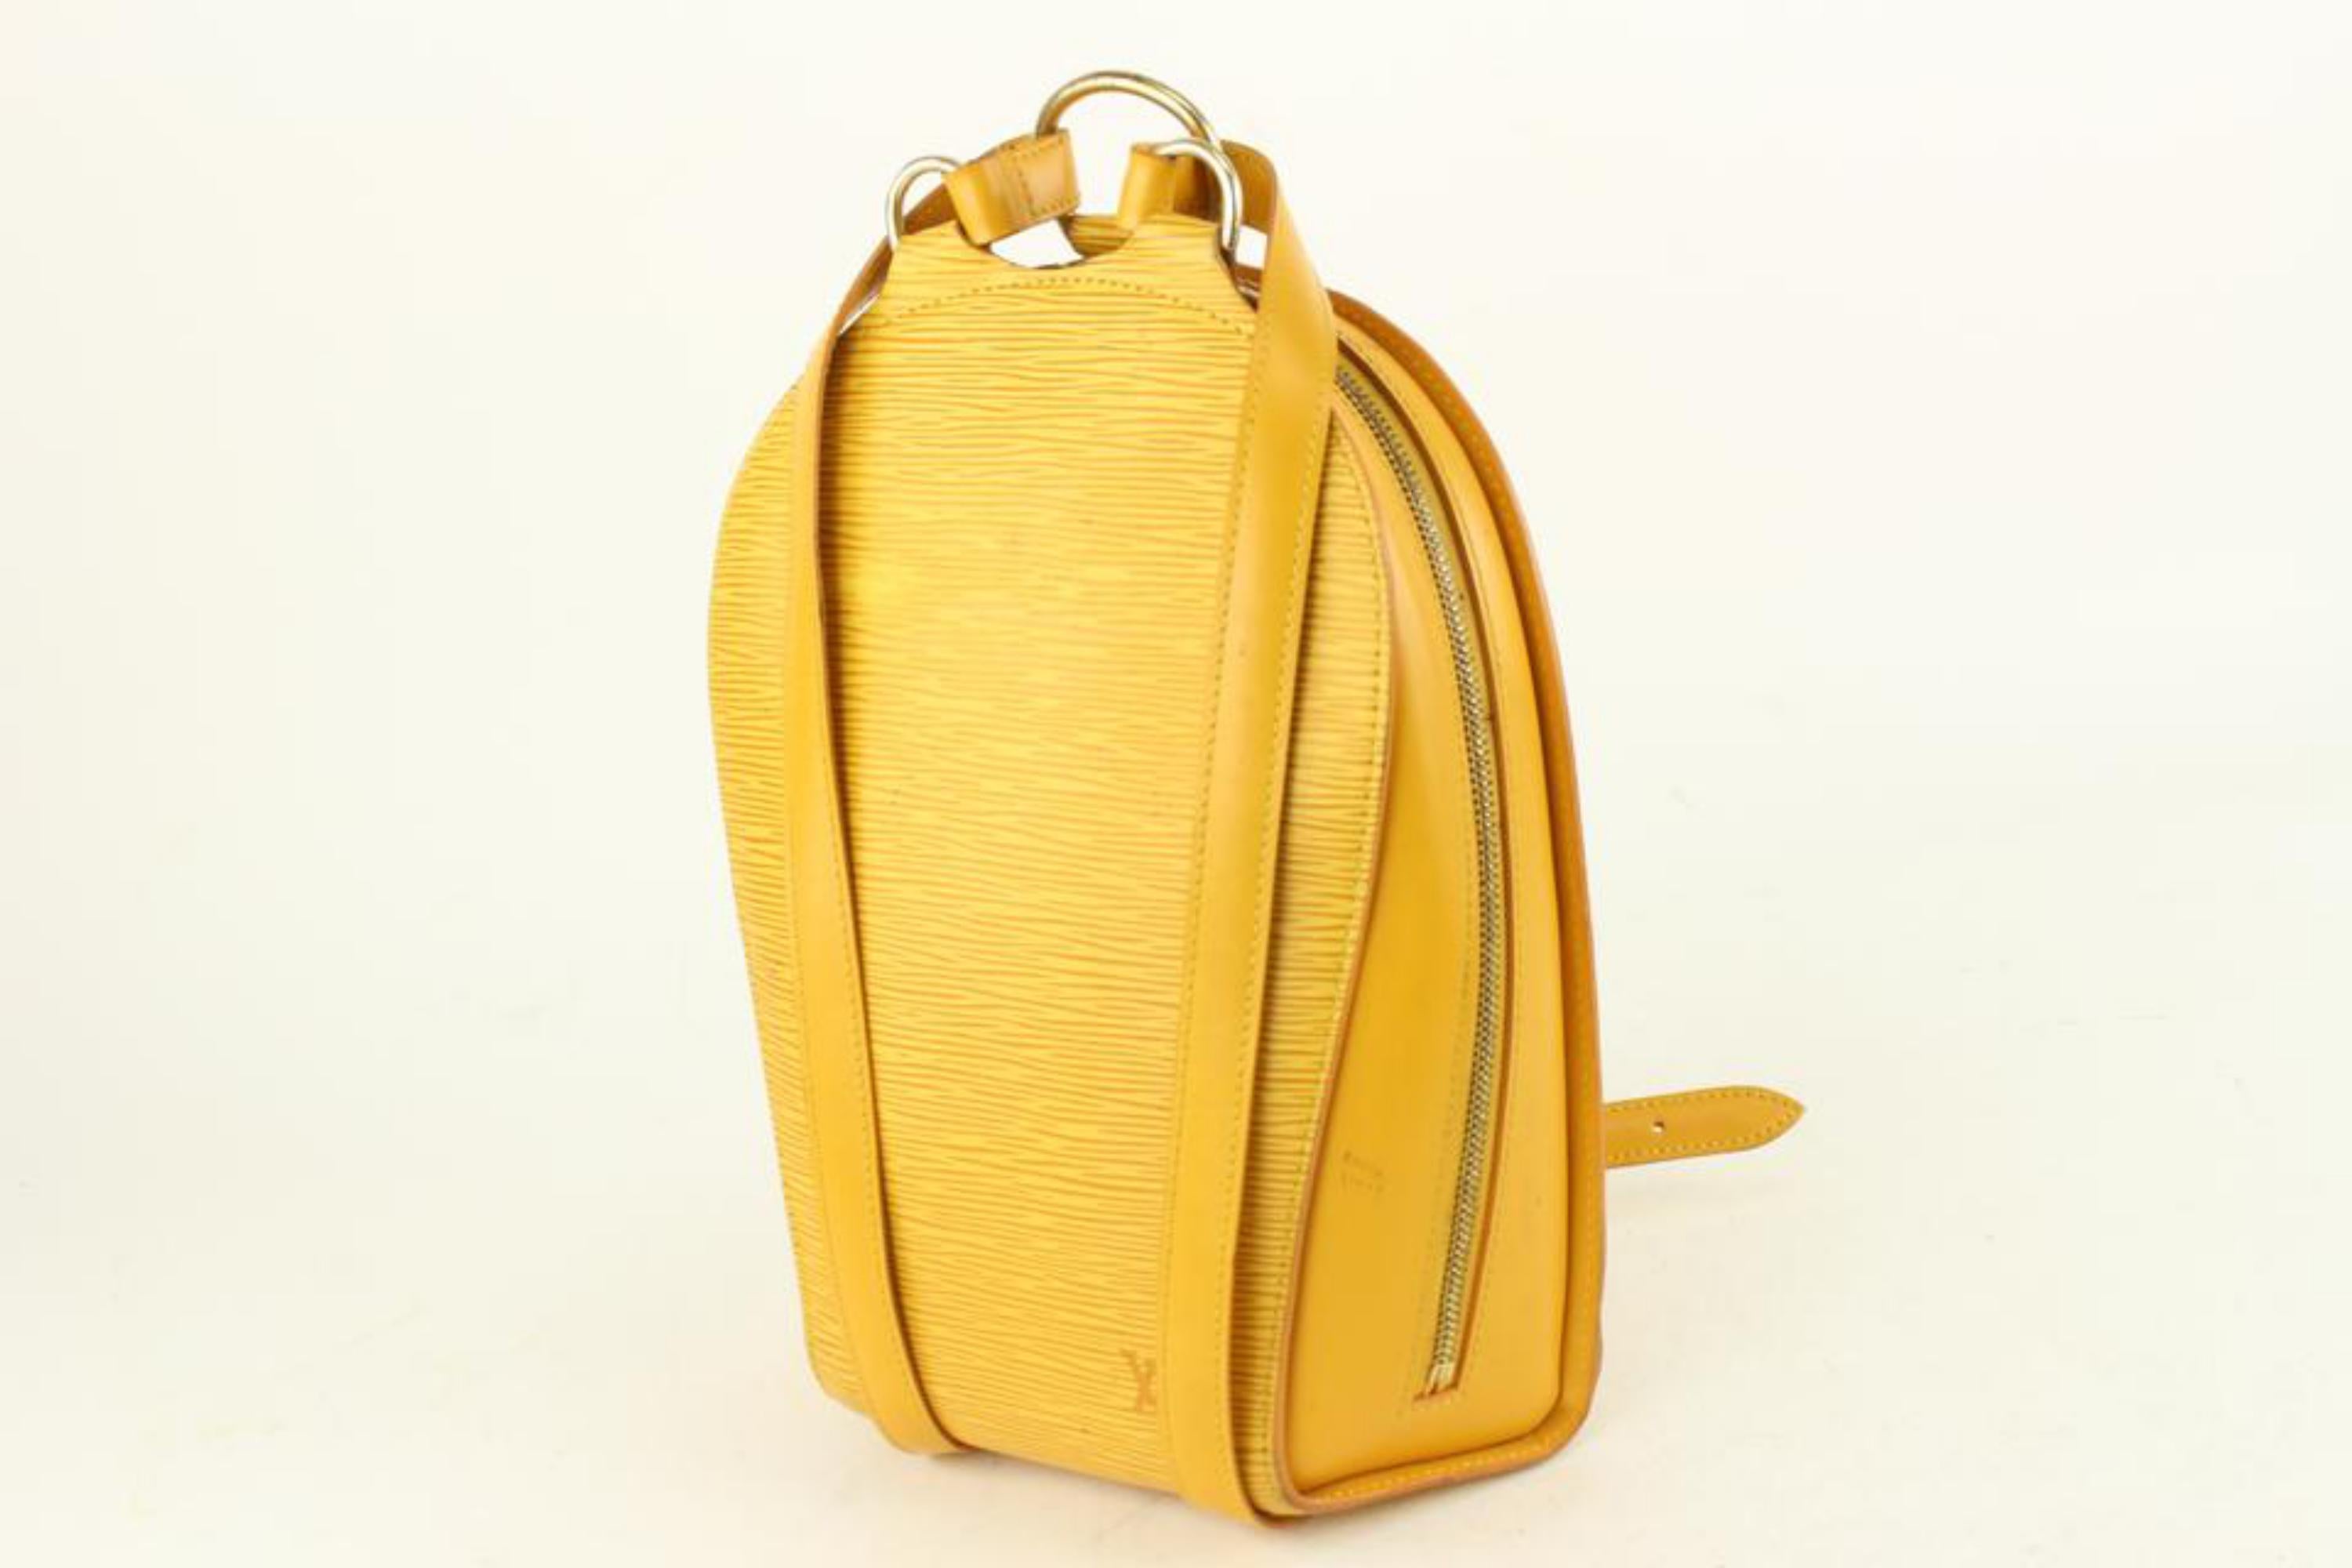 Louis Vuitton Yellow Epi Leather Mabillon Backpack 6lv1108
Date Code/Serial Number: VI1977
Made In: France
Measurements: Length: 8 